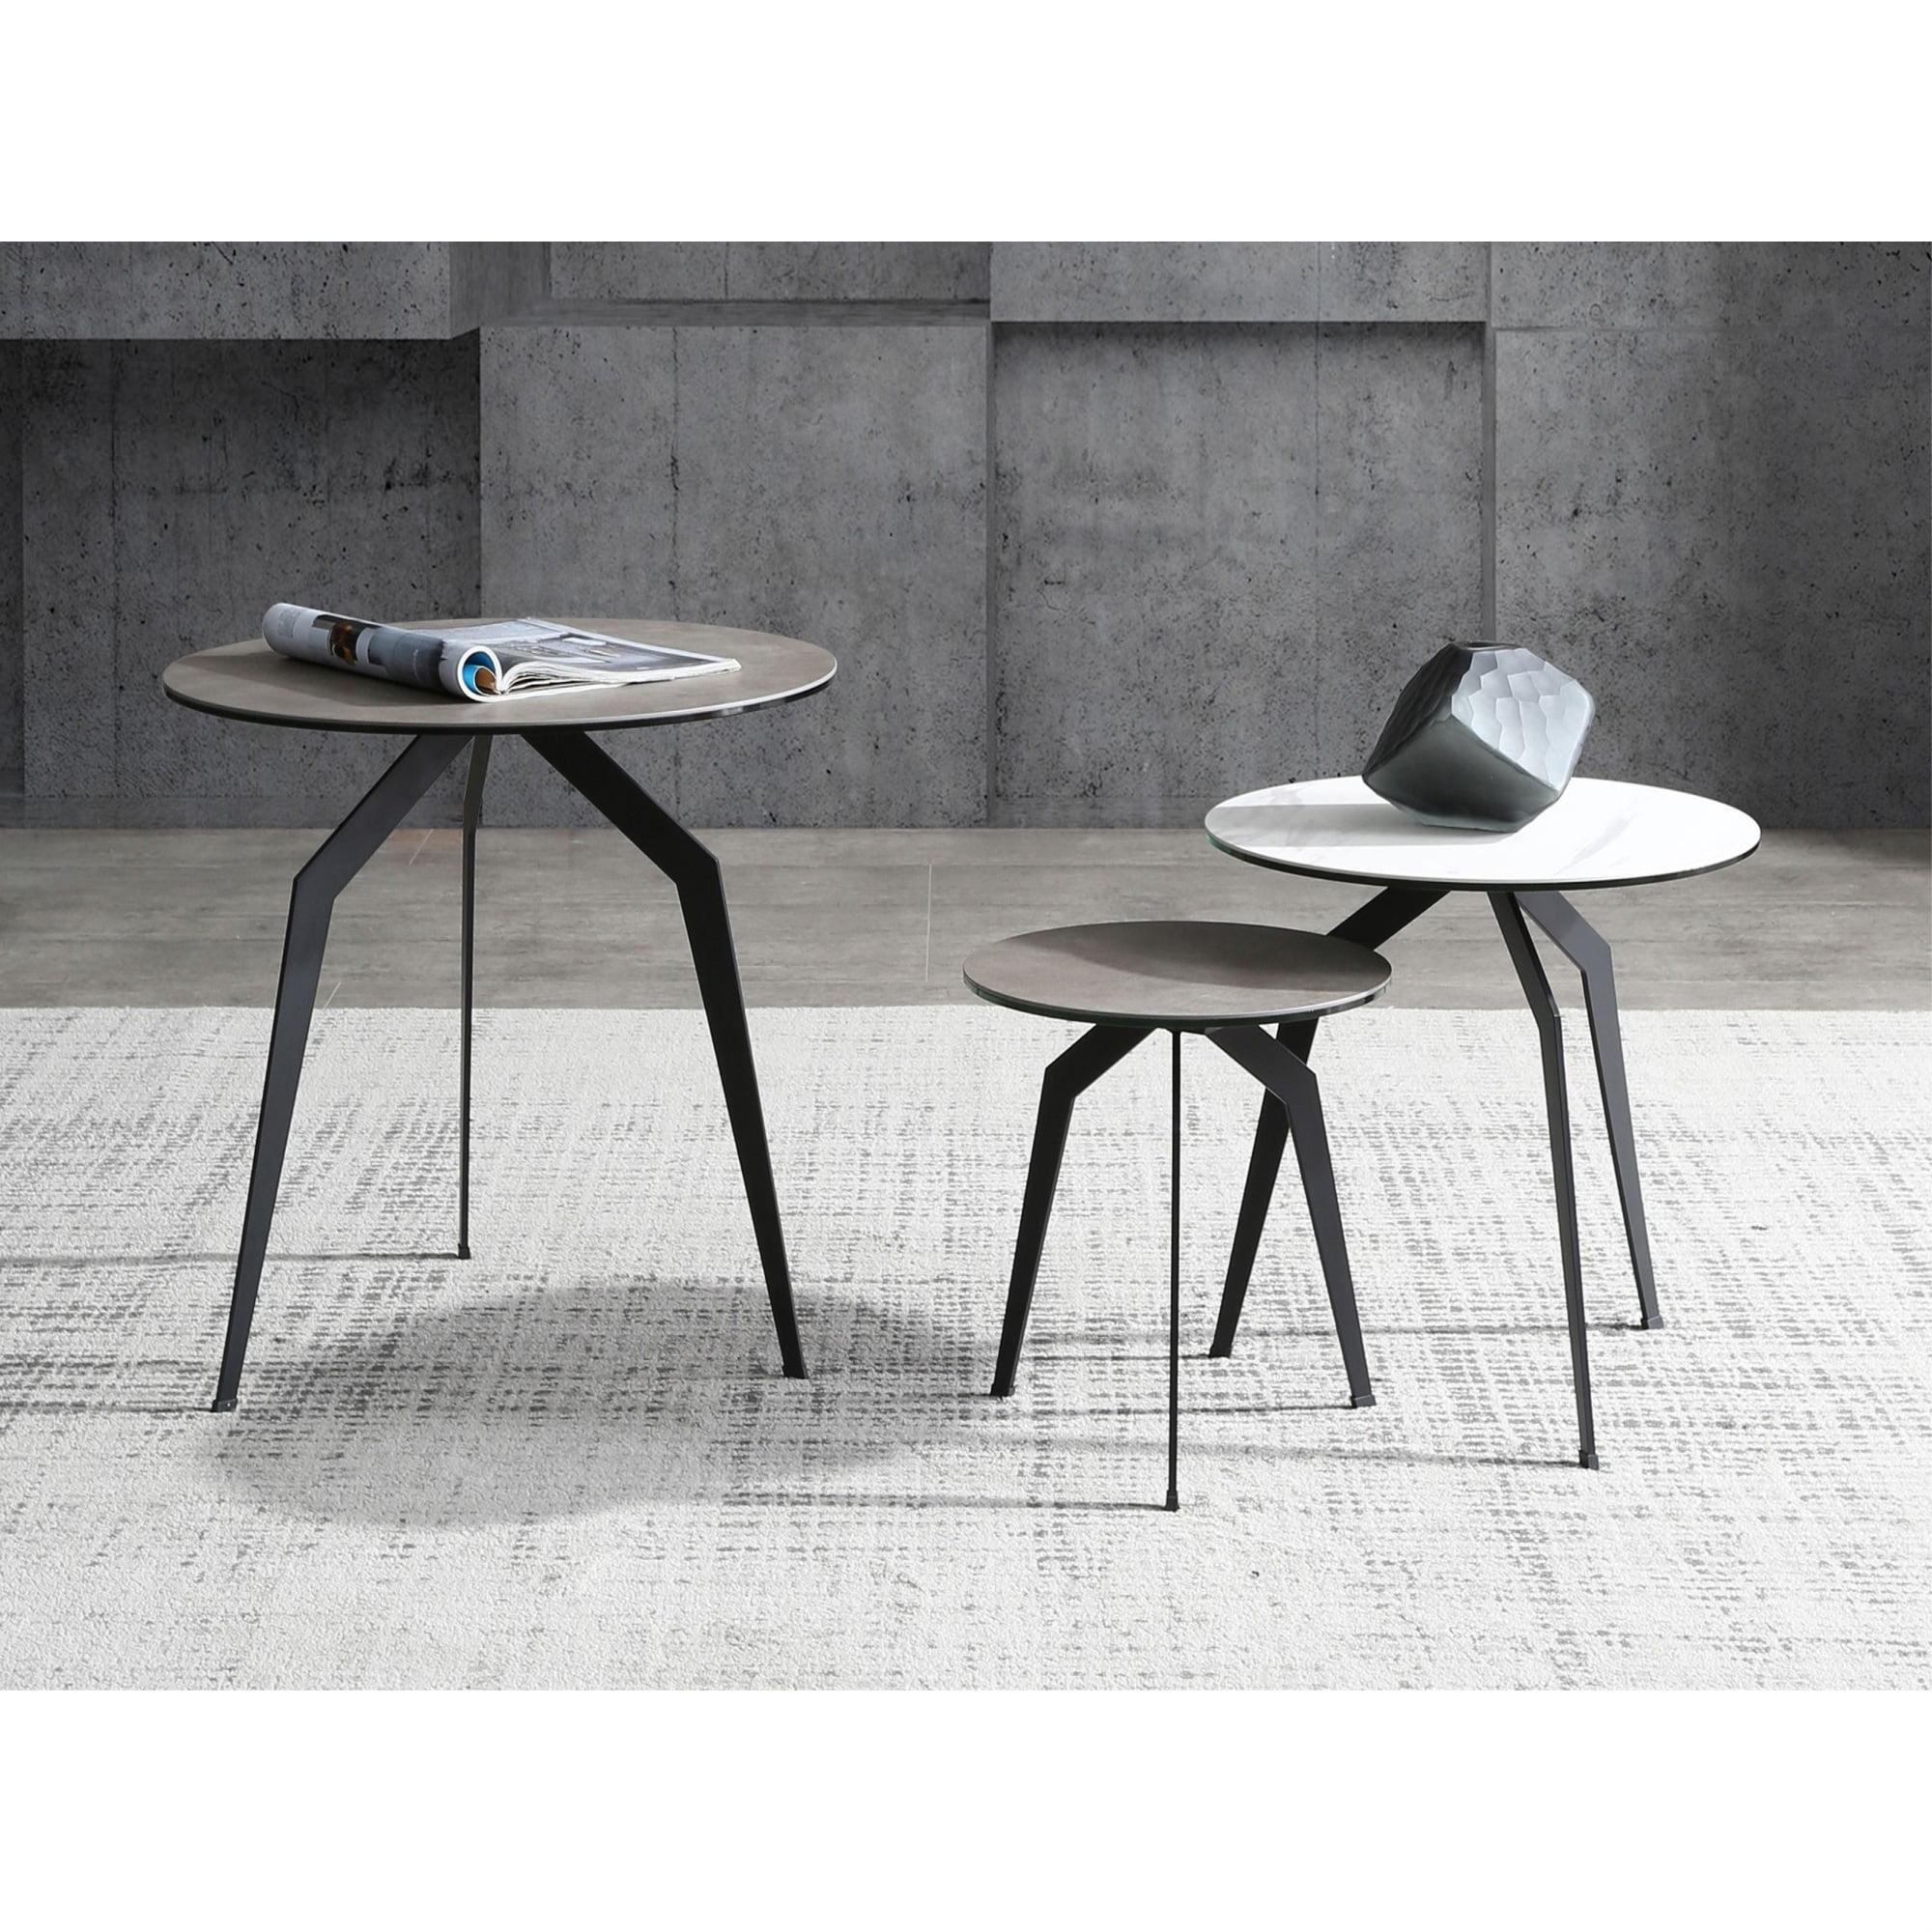 Santiago Round Glass and Ceramic Nesting Side Tables